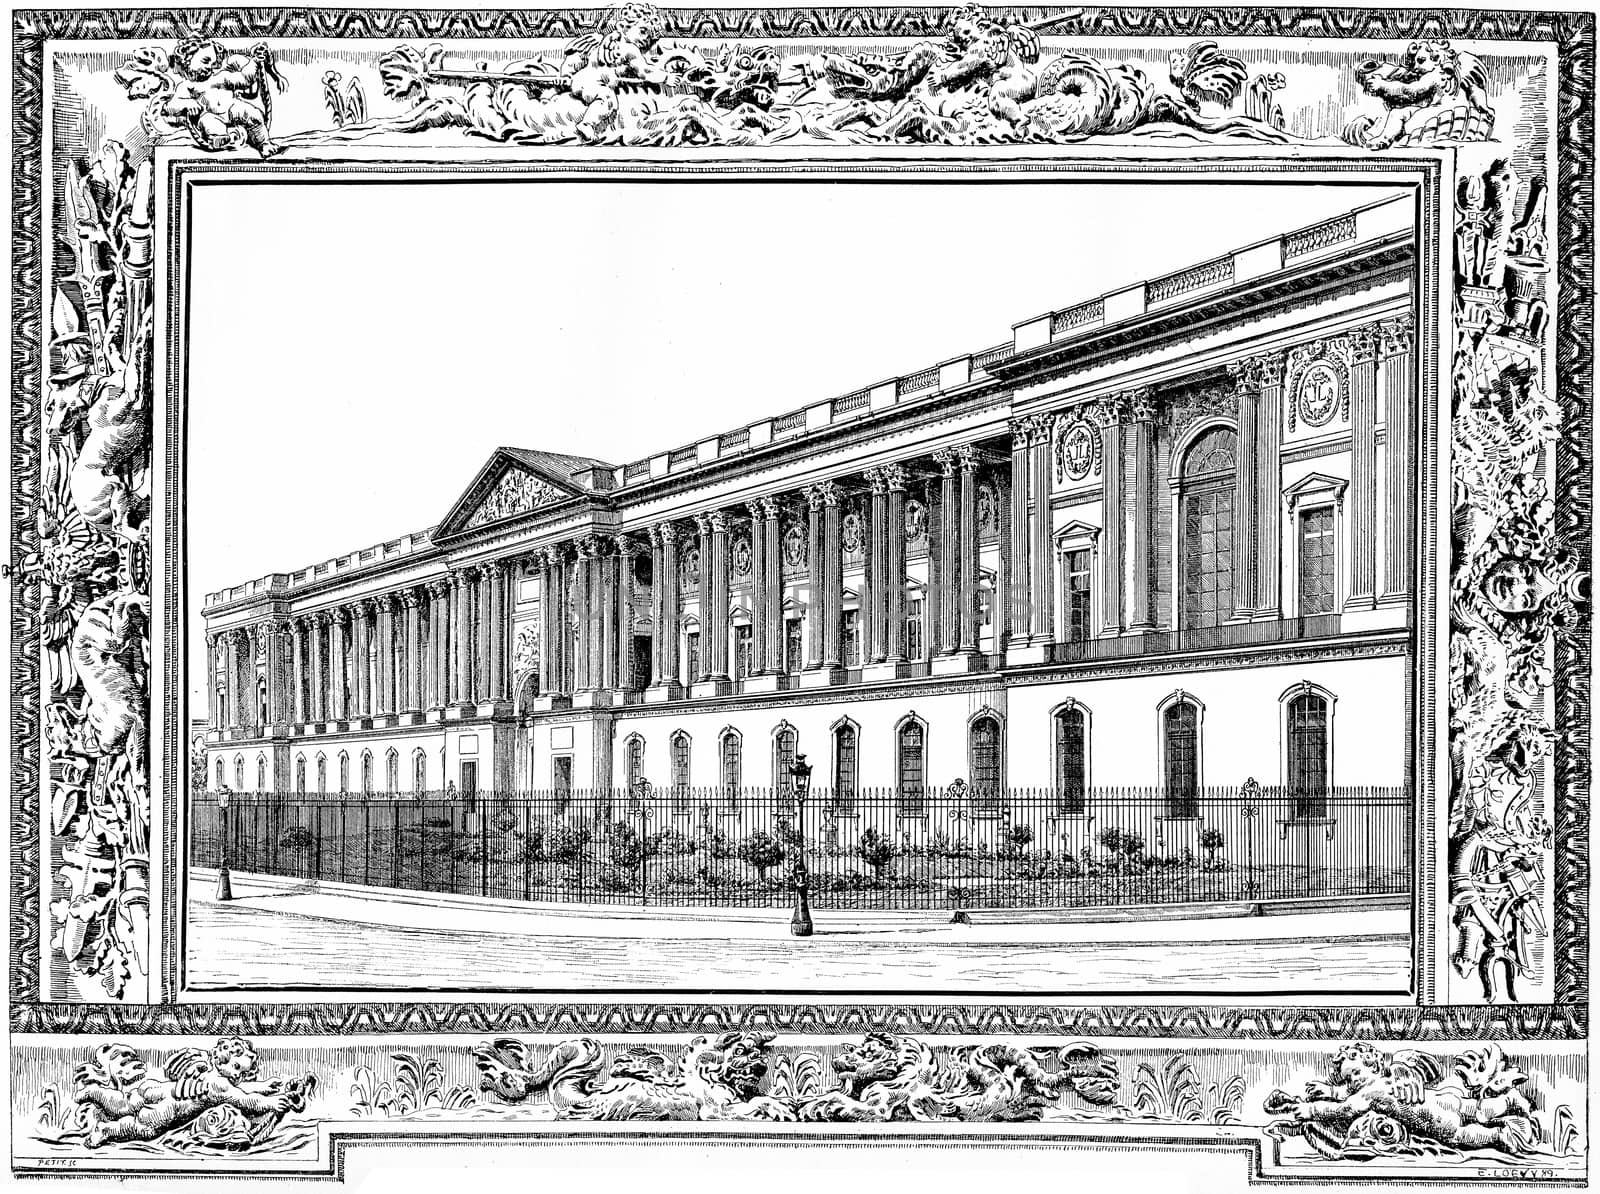 The colonnade of the Louvre, vintage engraving. by Morphart